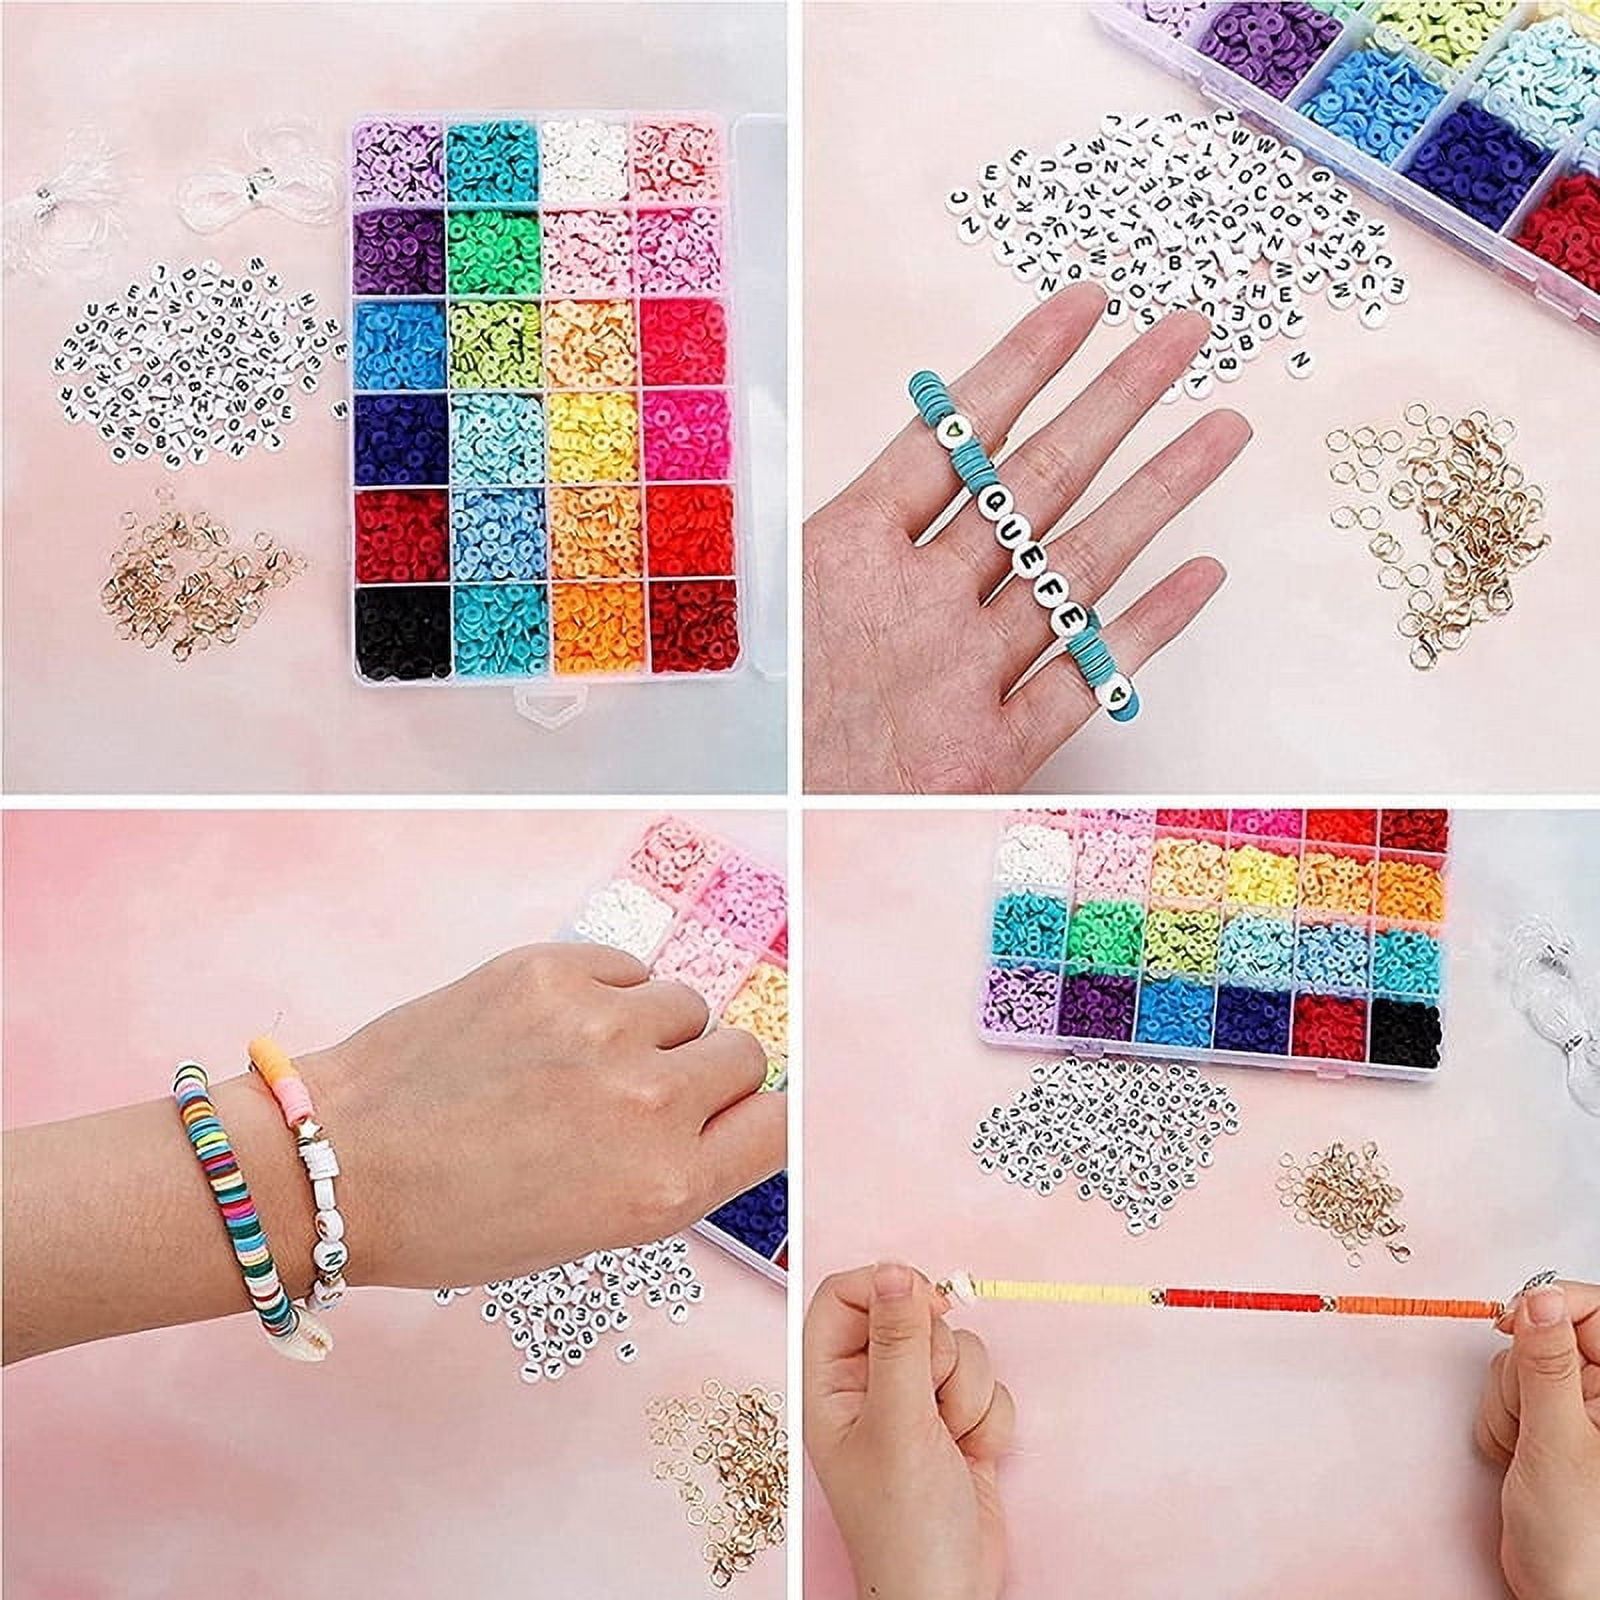 7636 pcs Clay Beads Bracelet Making Kit- Pearl Beads & Letter Beads for  Jewelry Making-Jewellery Making Kit with Colourful Polymer Clay Beads Charm Bracelet  Beads & DIY Jewellery Making Supplies